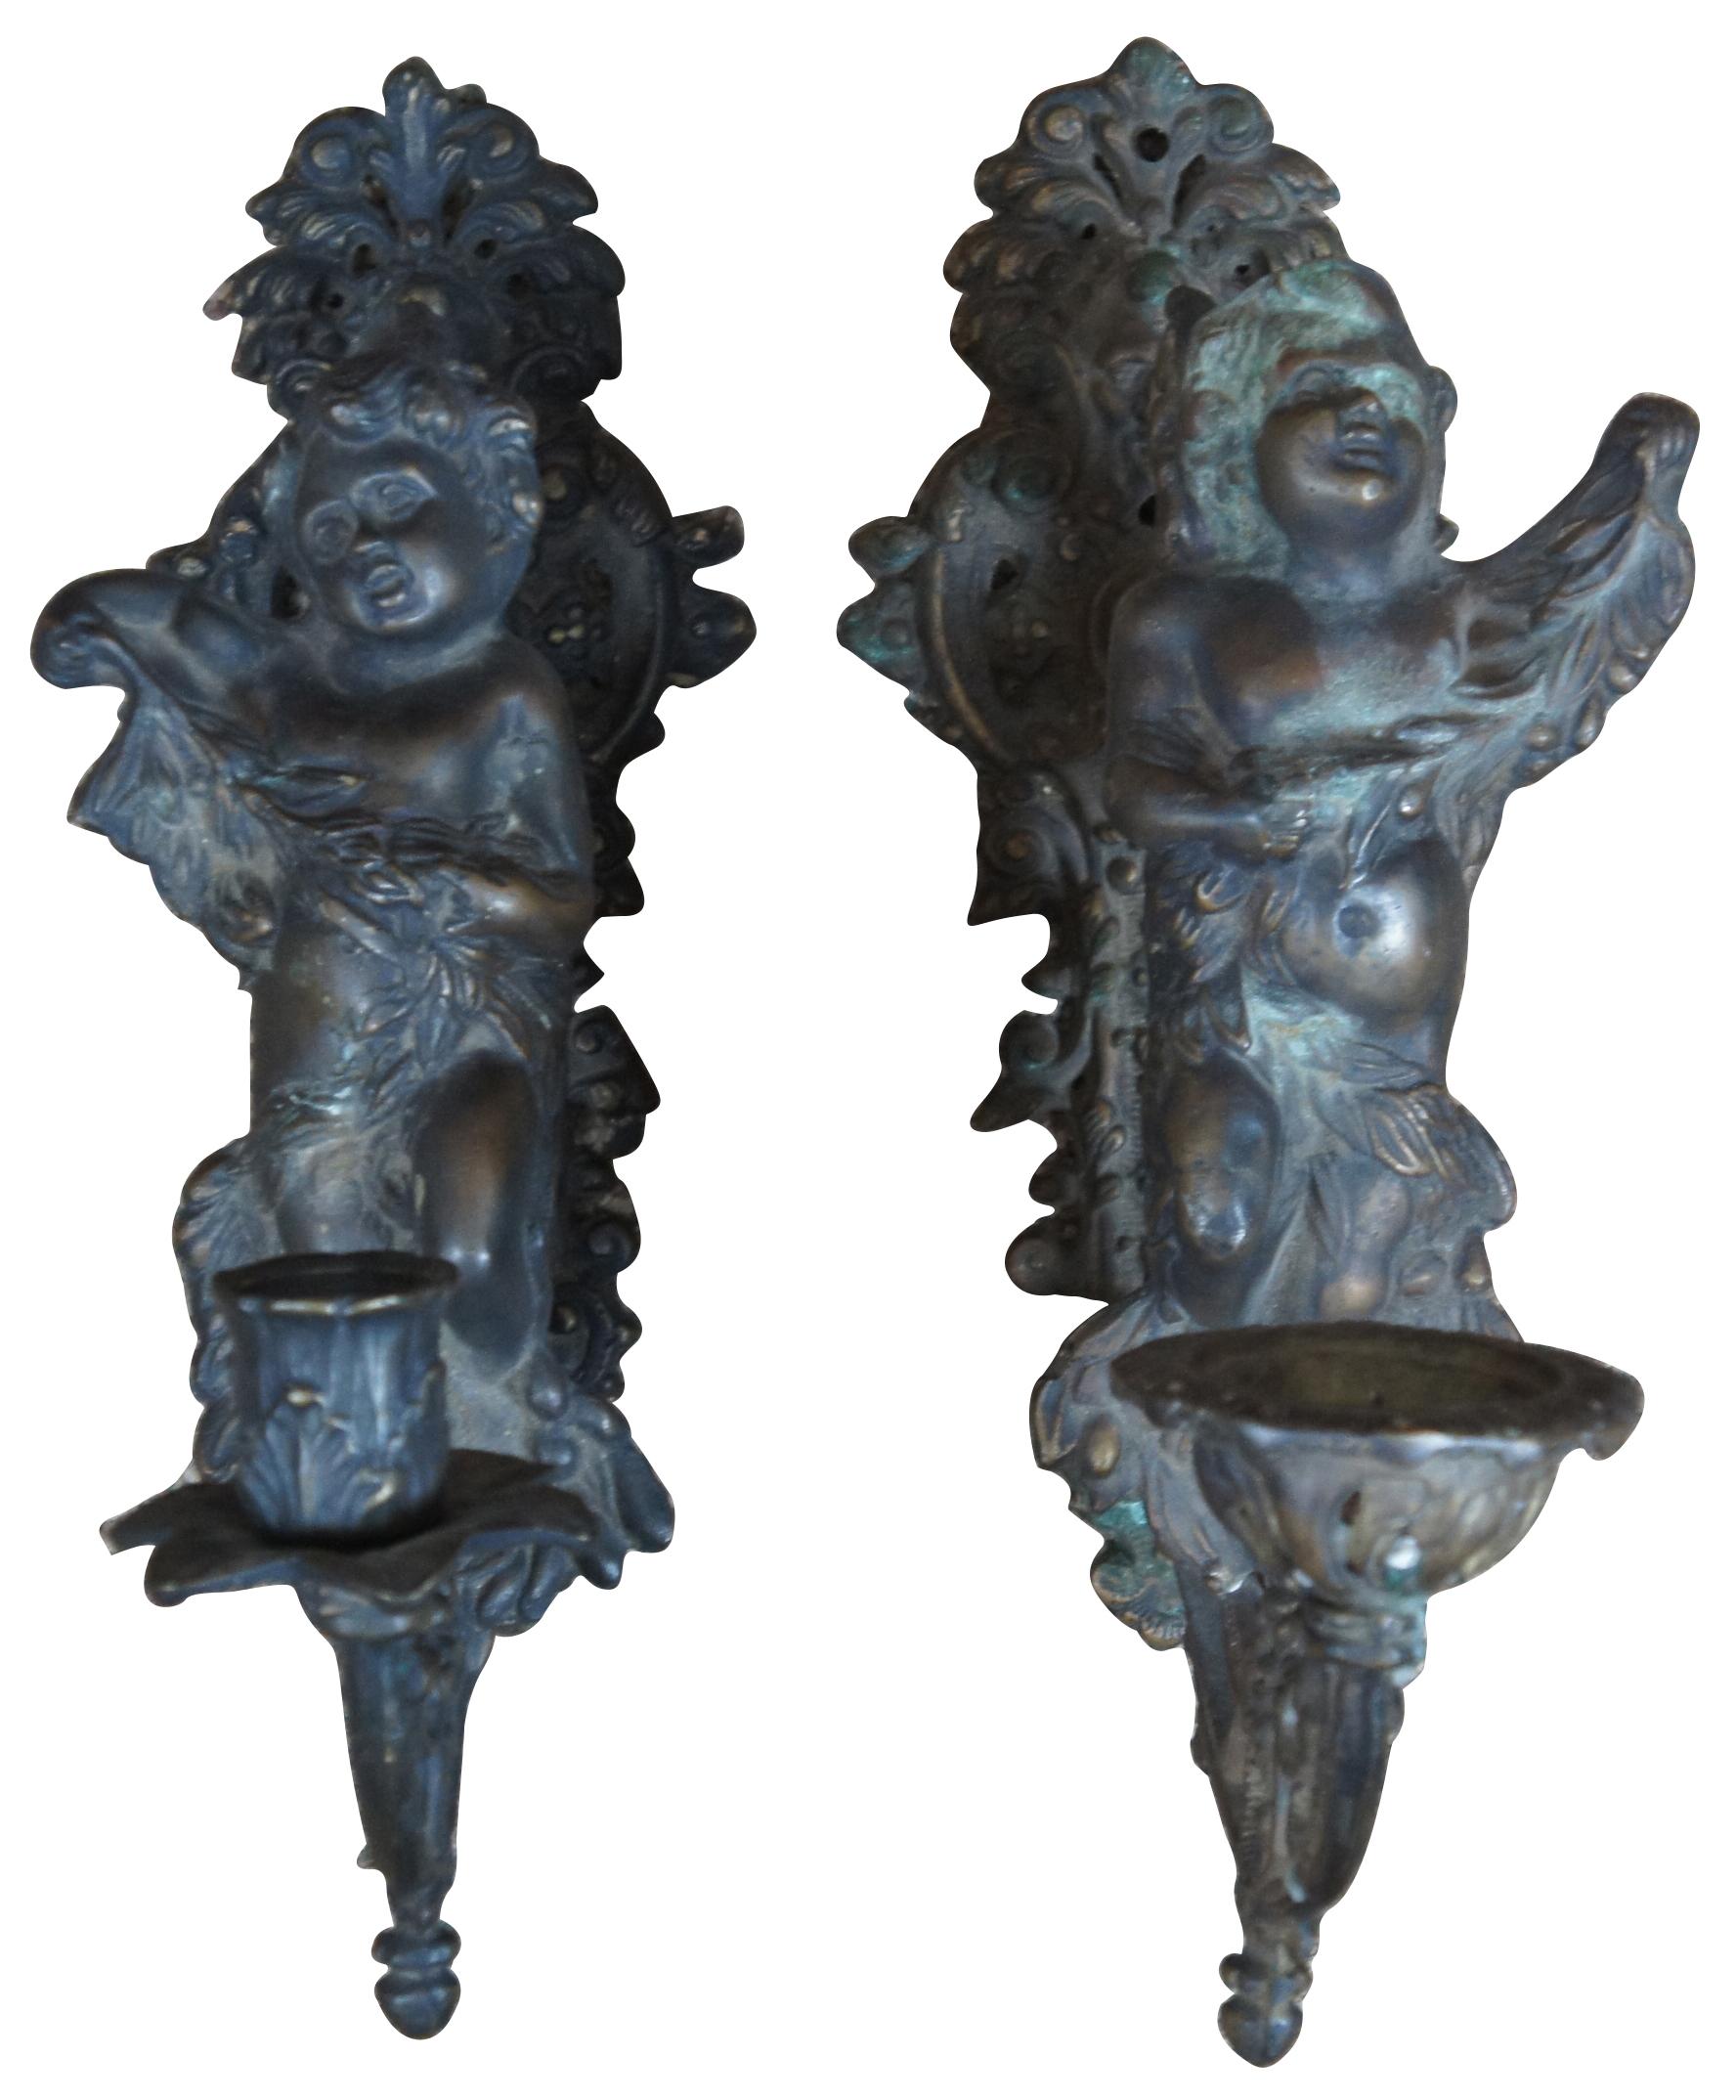 Two heavy bronze 19th century Victorian figural wall sconces. Features ornate scrolled back leading to cherubs which continue to the candle holder. A face ordains the back plate which appears to be Dionysus or Bacchus.